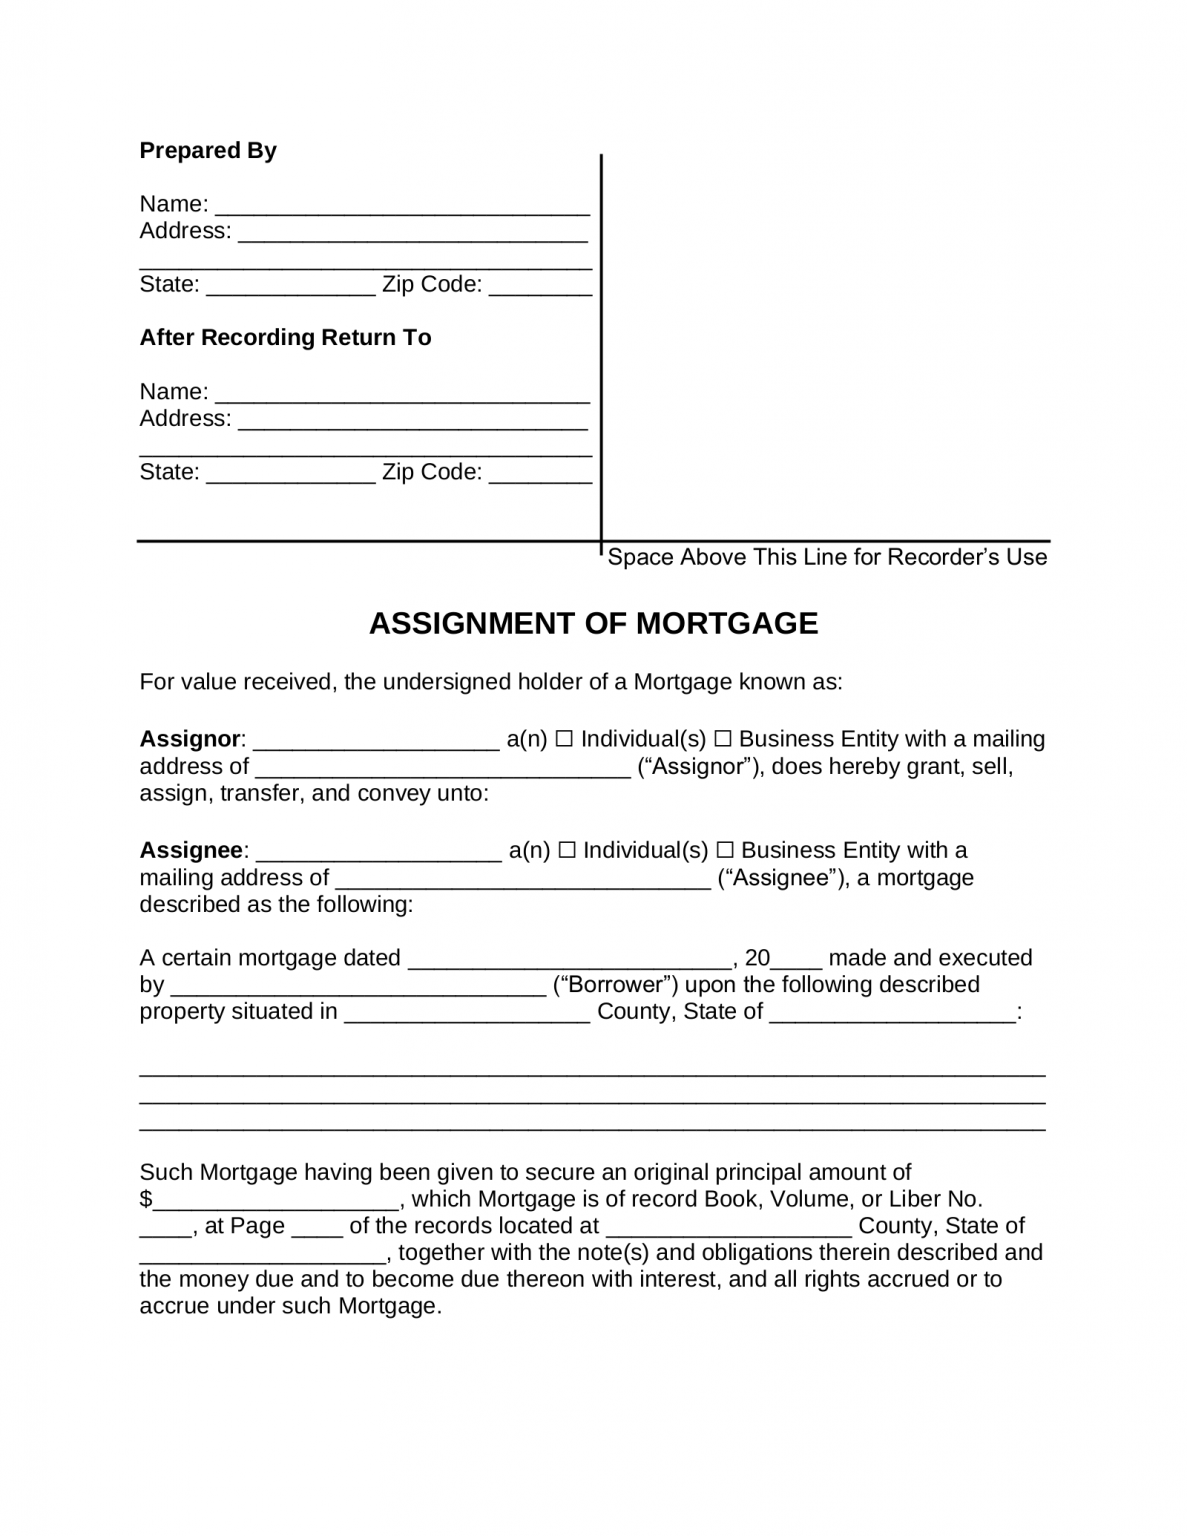 what does assignment mean in mortgage